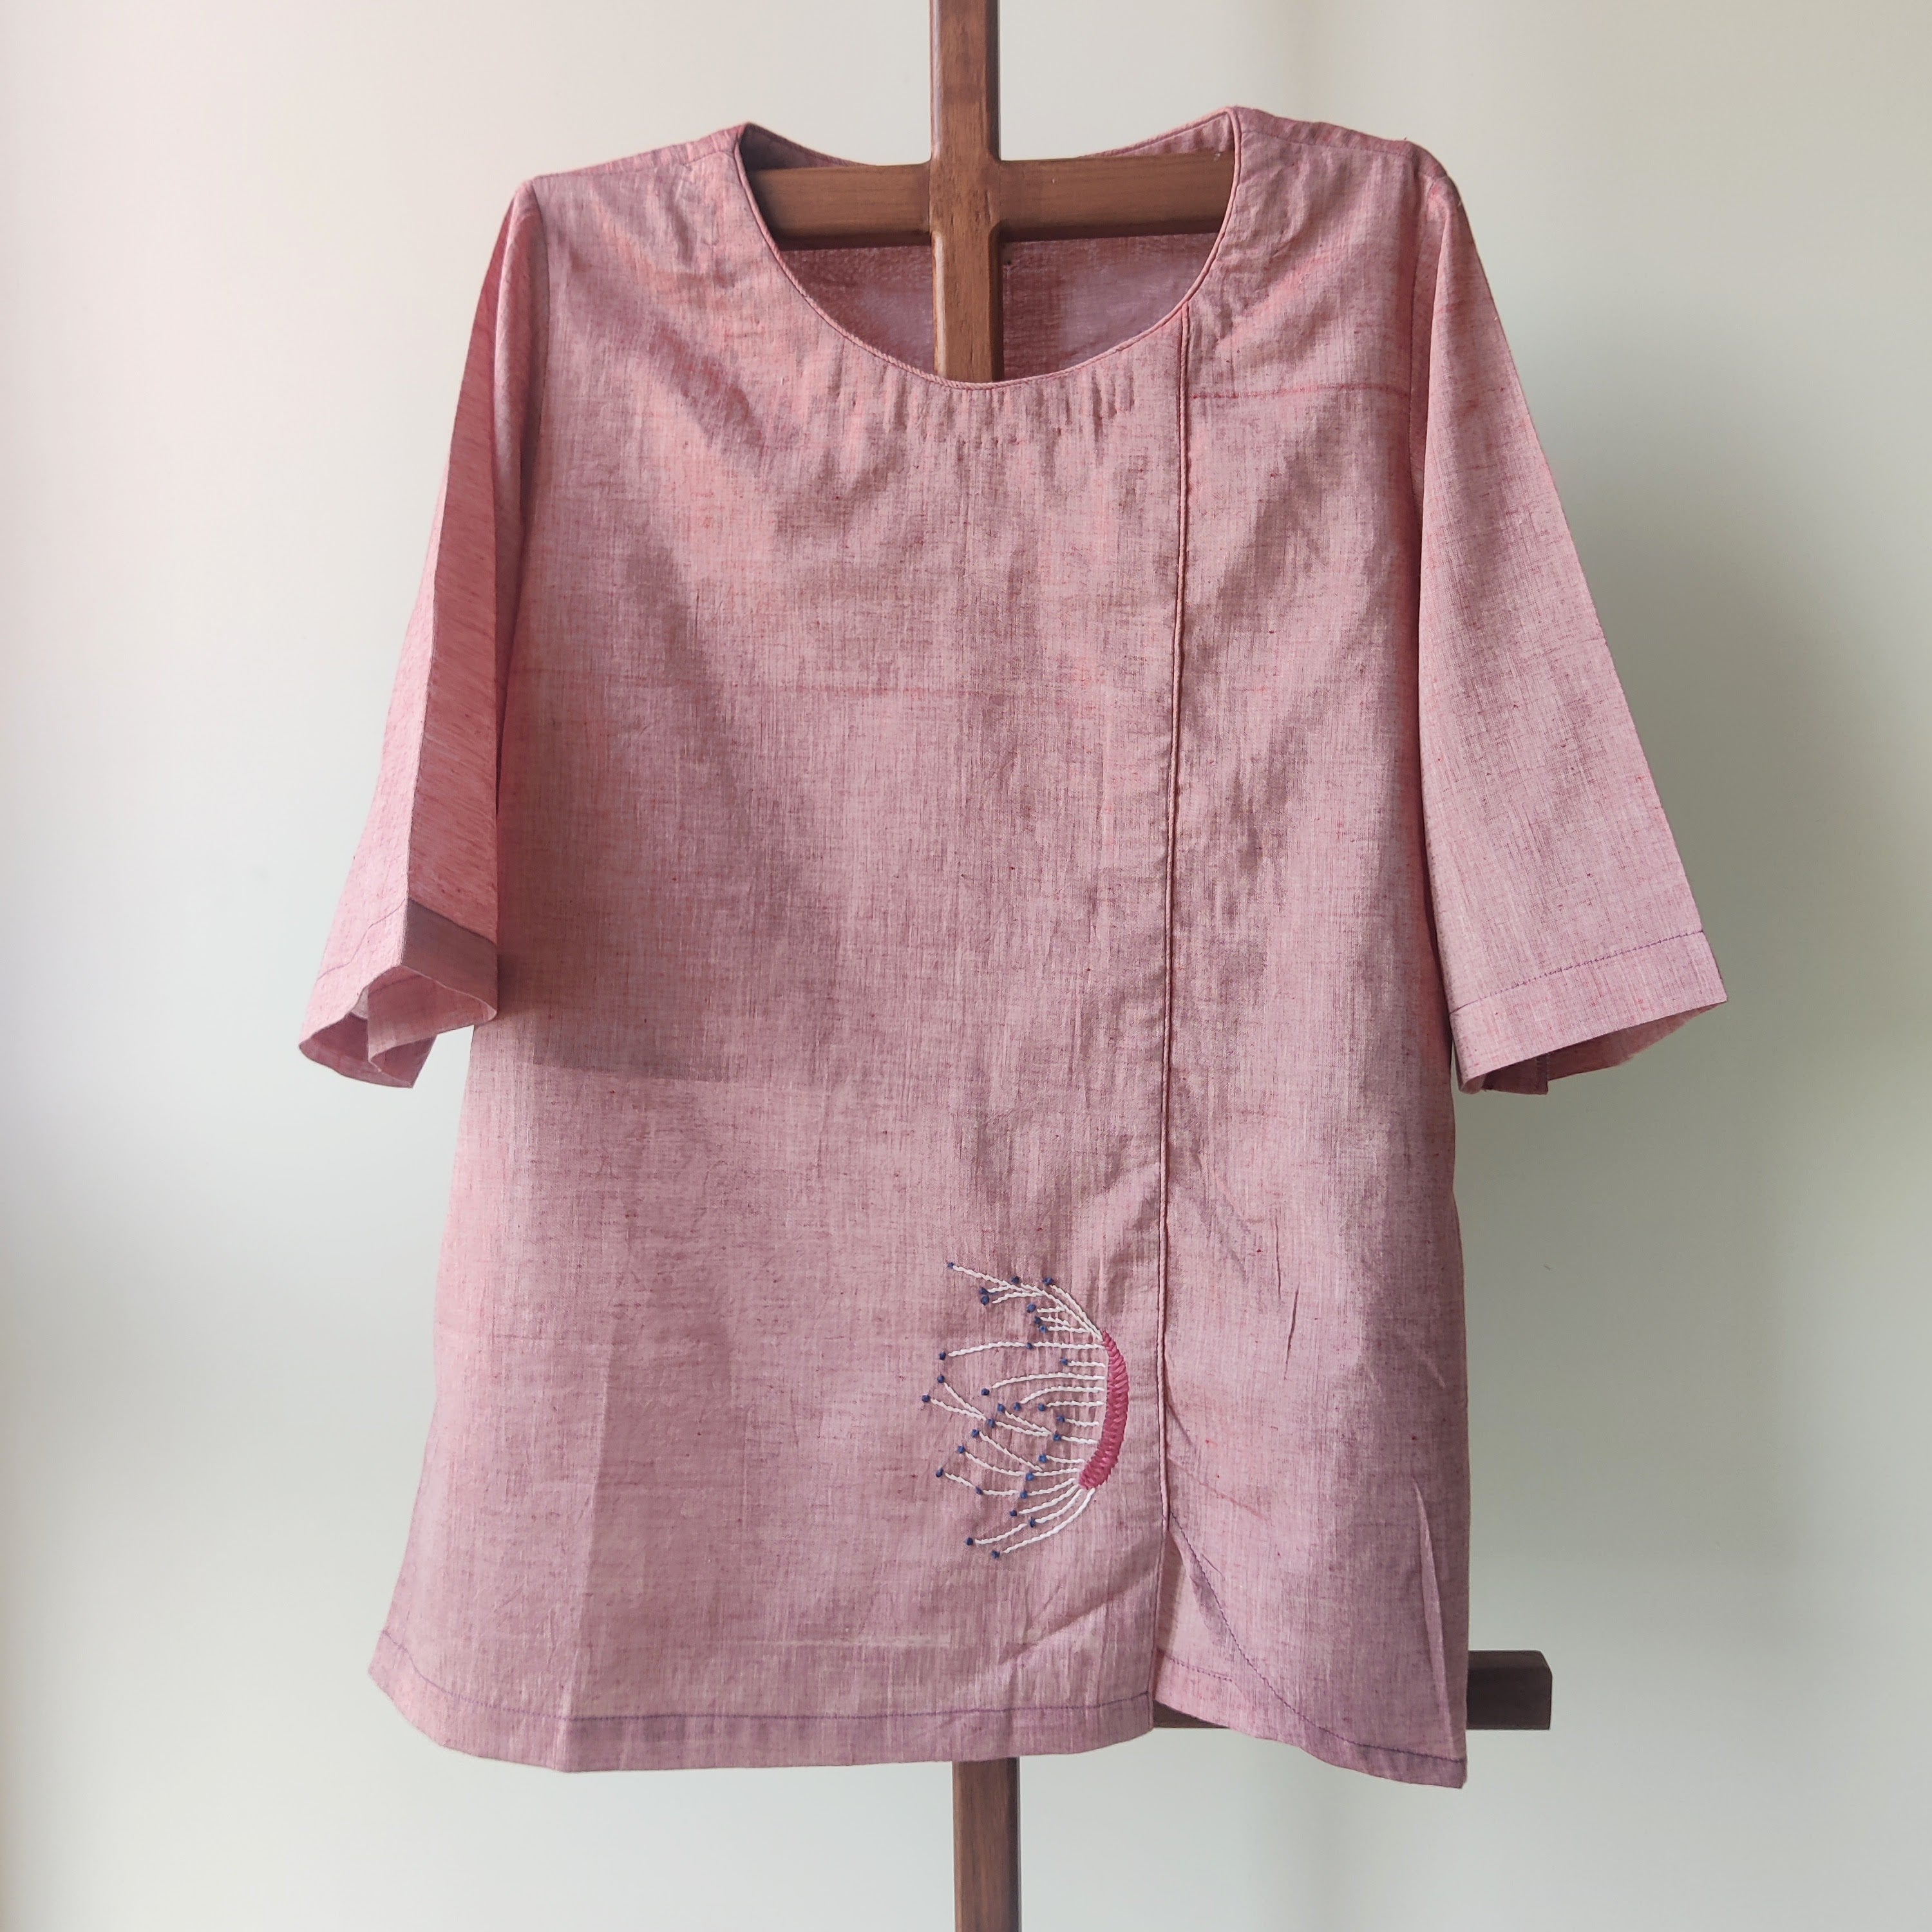 Pink Muslin Top with Embroidery